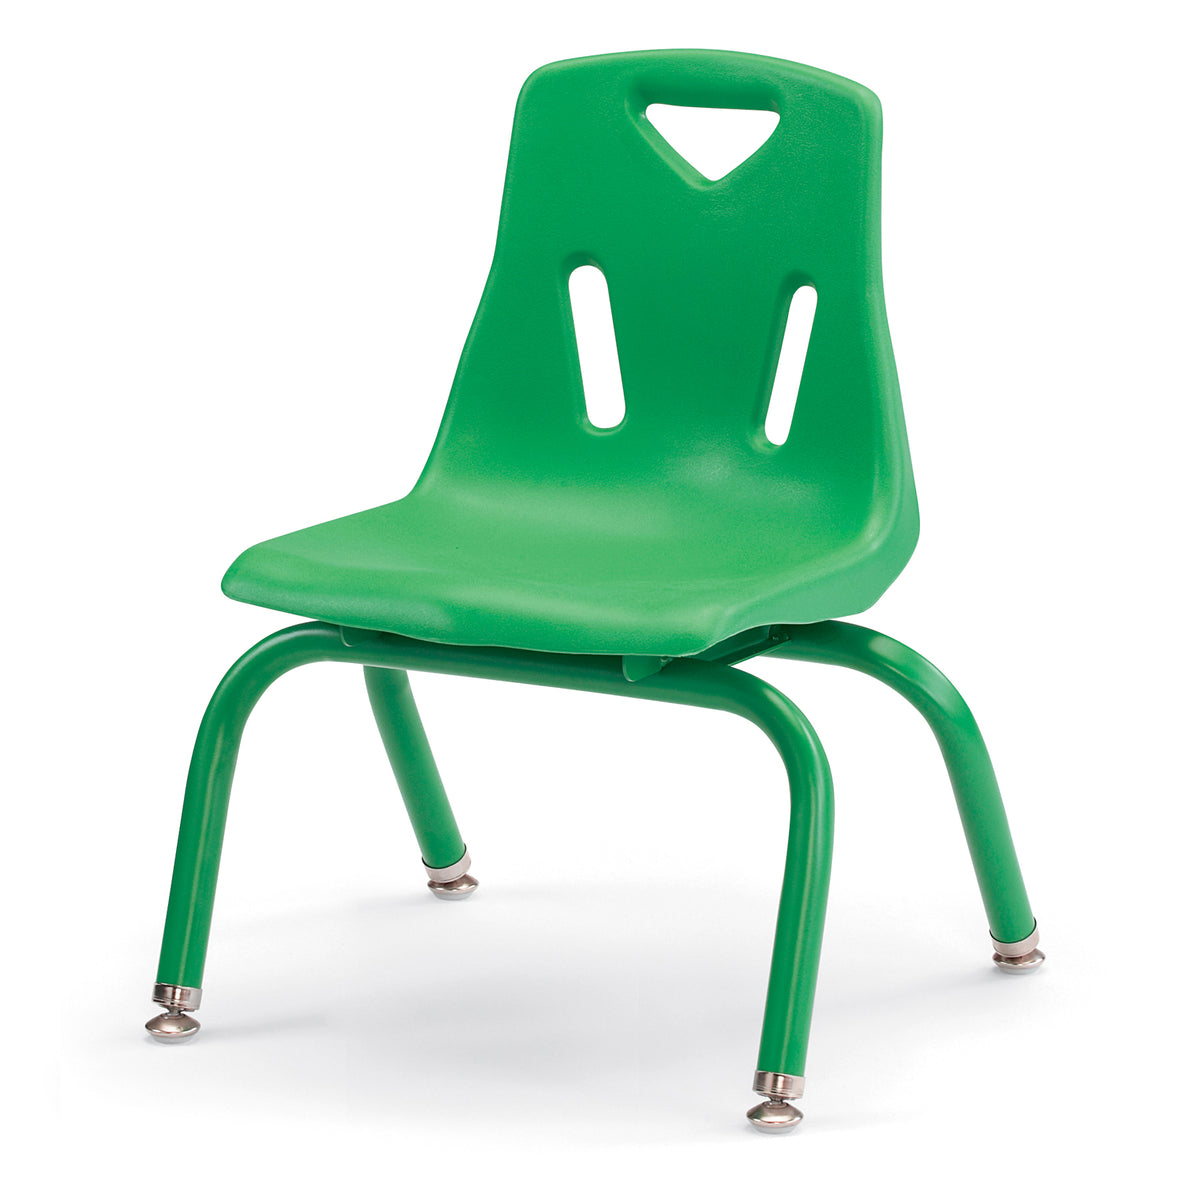 8120JC1119, Berries Stacking Chair with Powder-Coated Legs - 10" Ht - Green